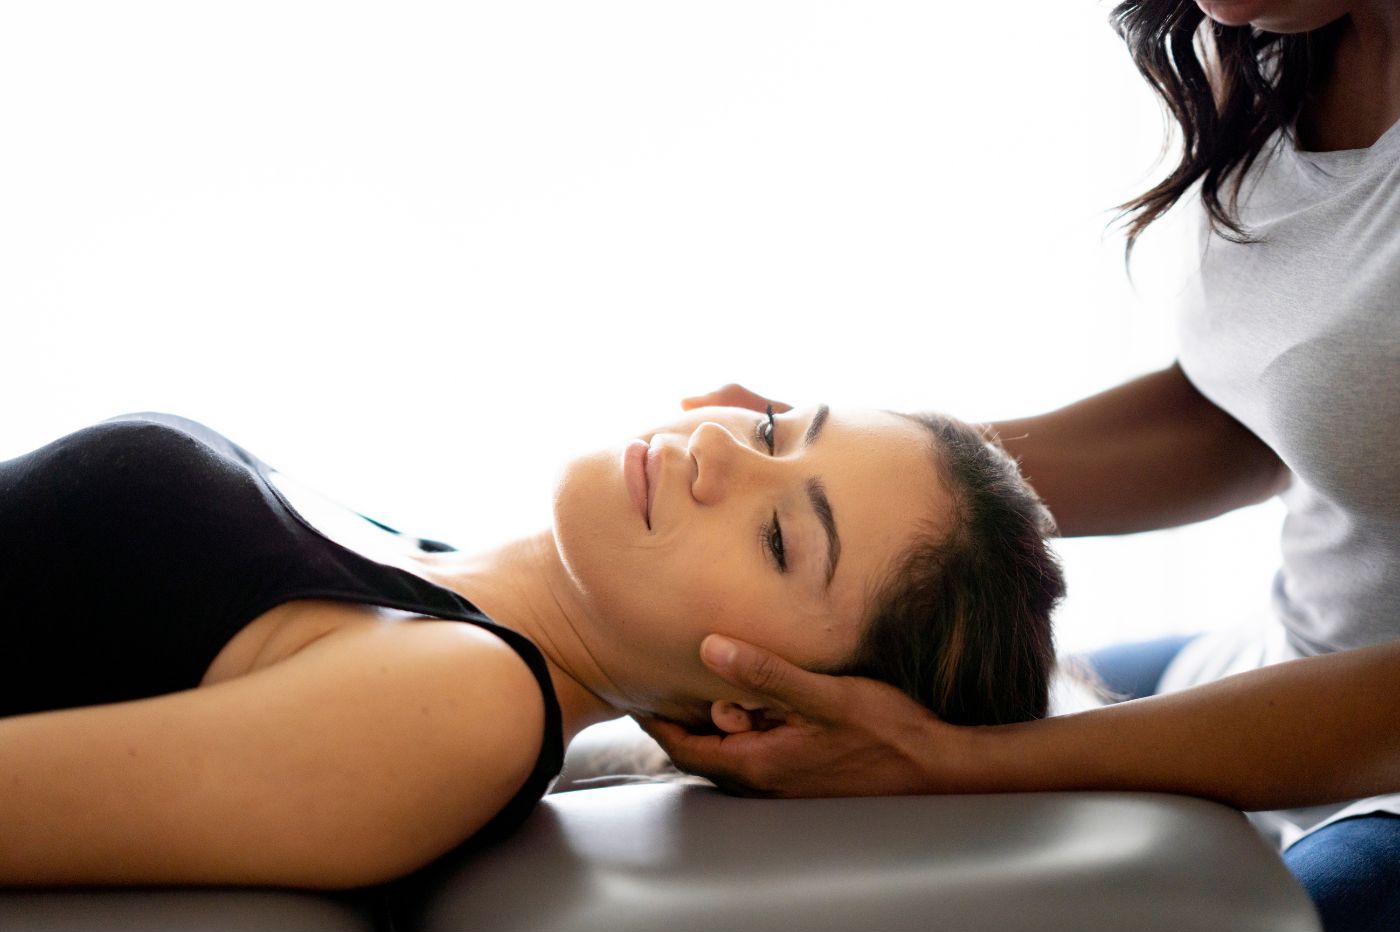 A woman receiving a gentle head massage from a therapist while lying on a massage table, conveying a sense of relaxation and care.